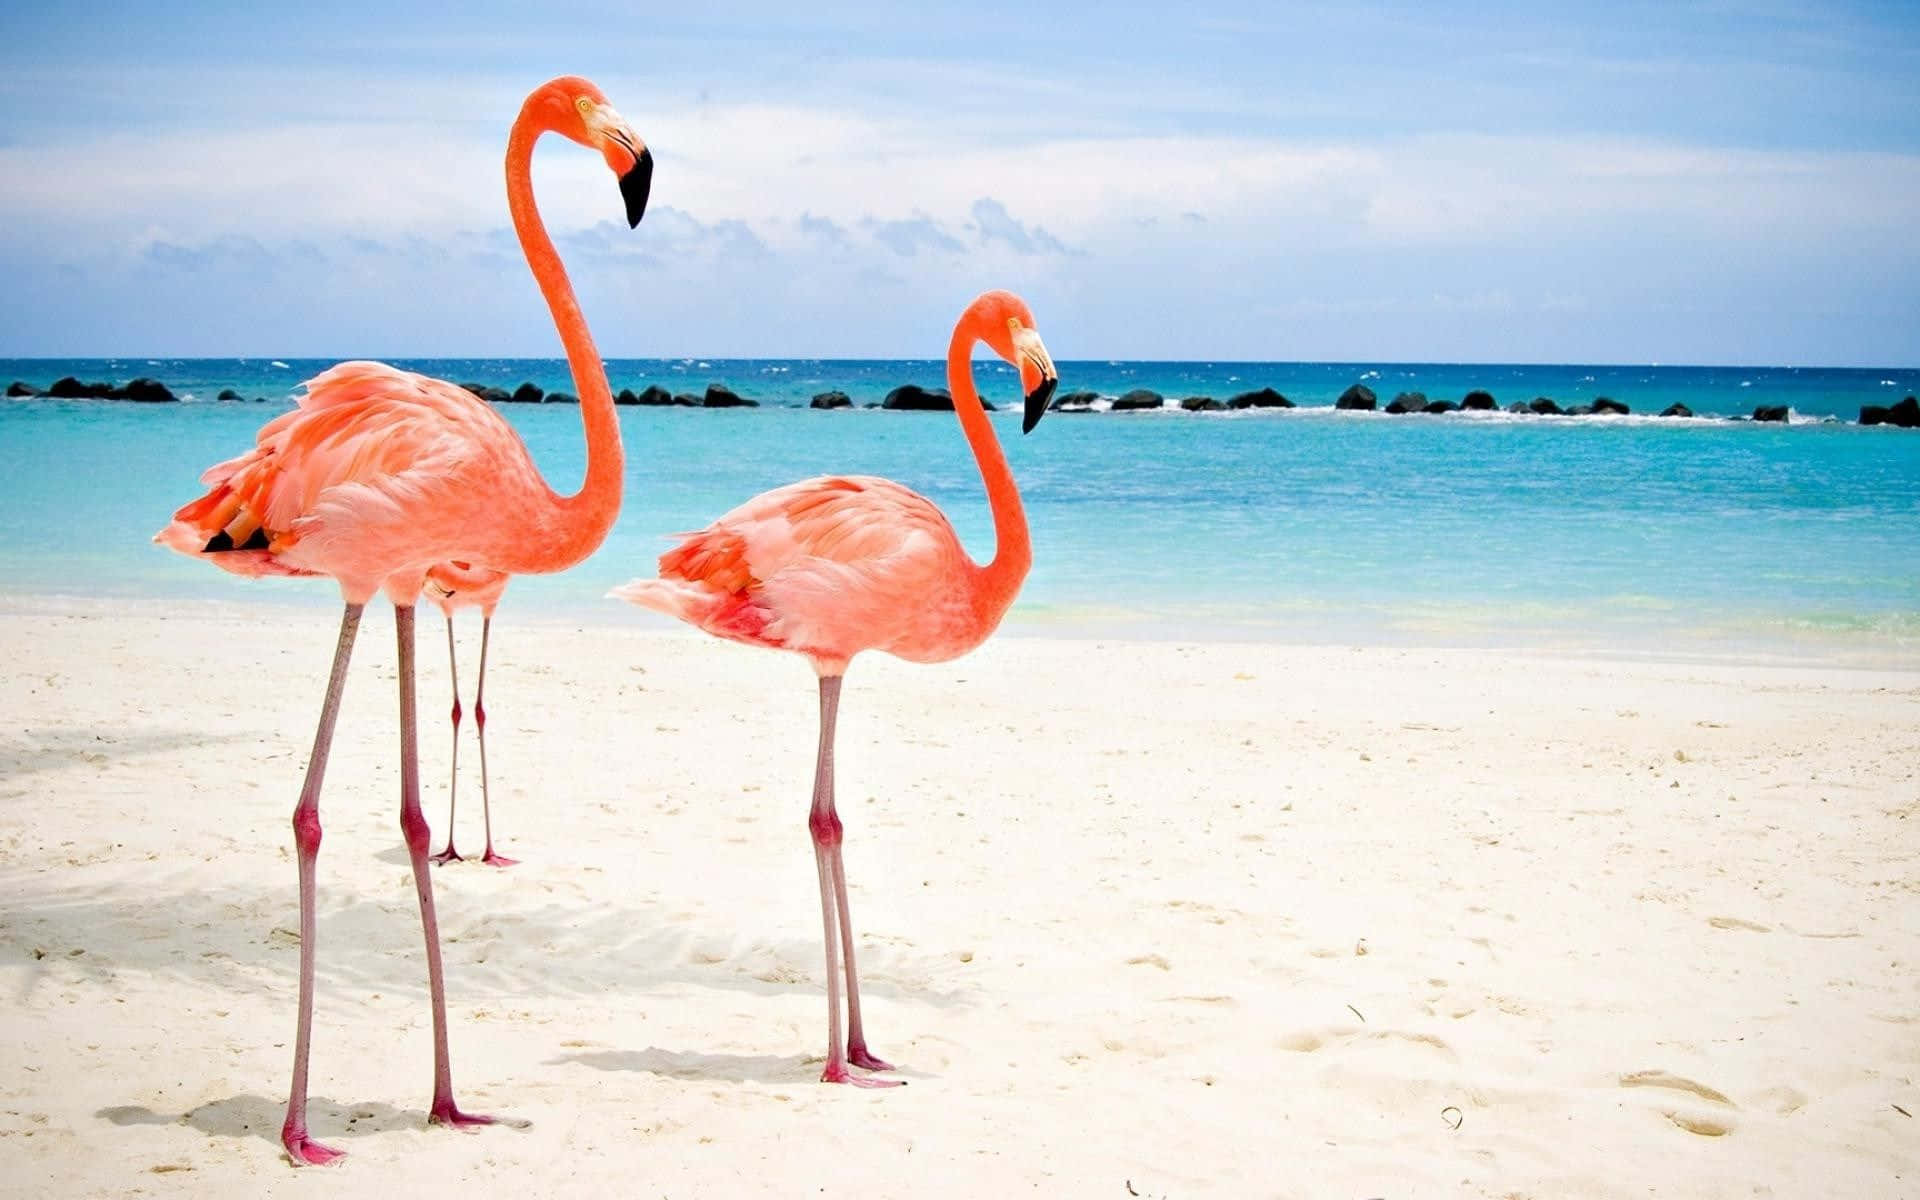 Take some time for yourself with the stylish Flamingo Laptop Wallpaper